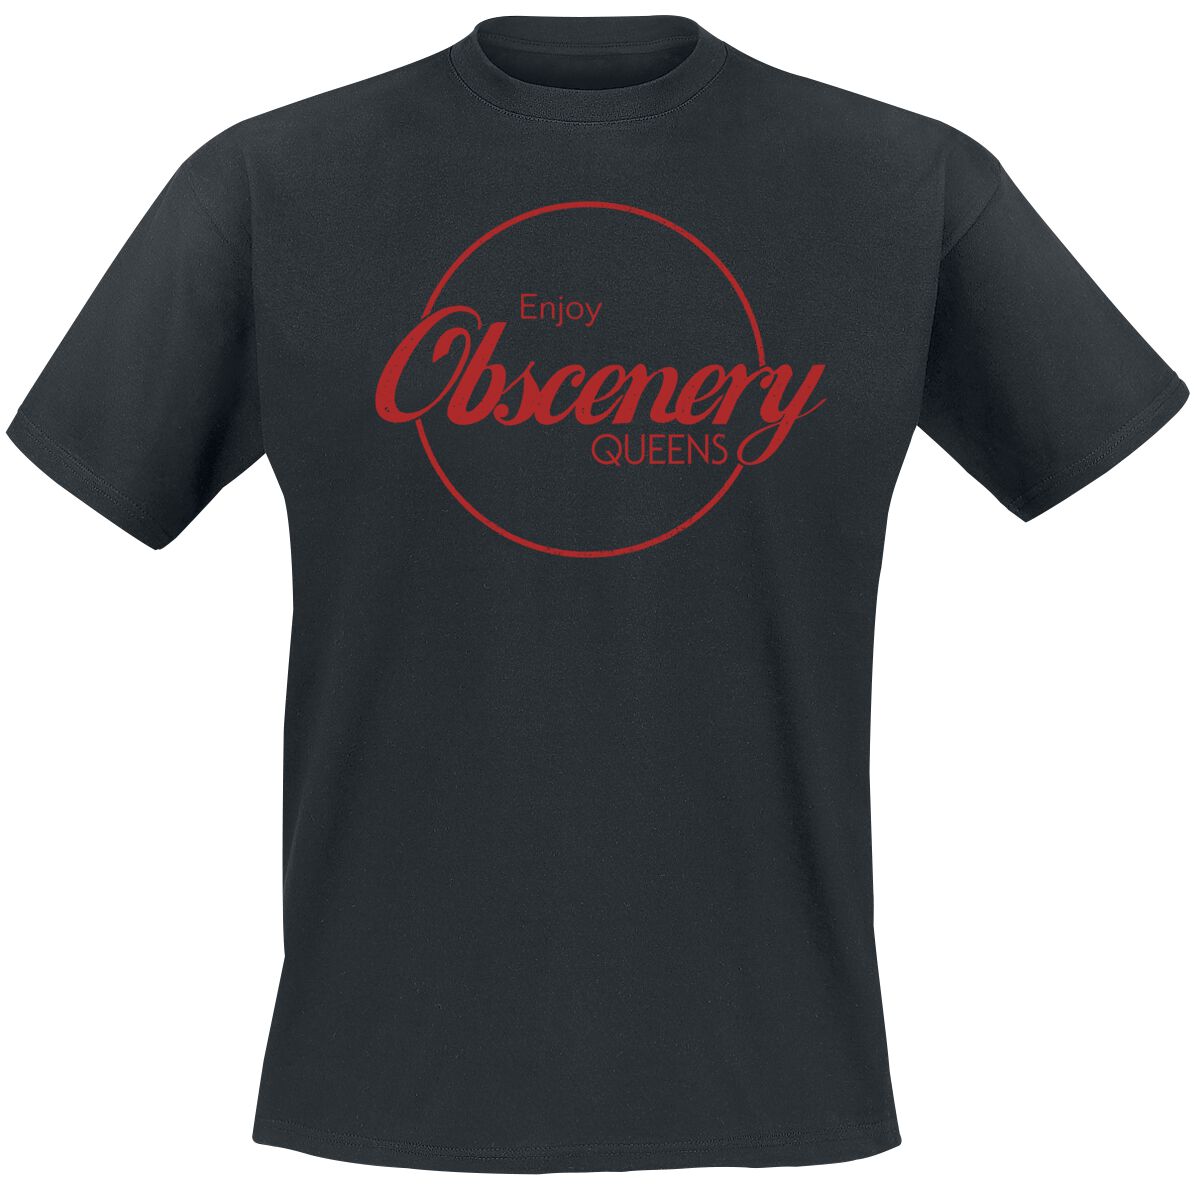 Queens Of The Stone Age Enjoy Obscenery T-Shirt schwarz in S